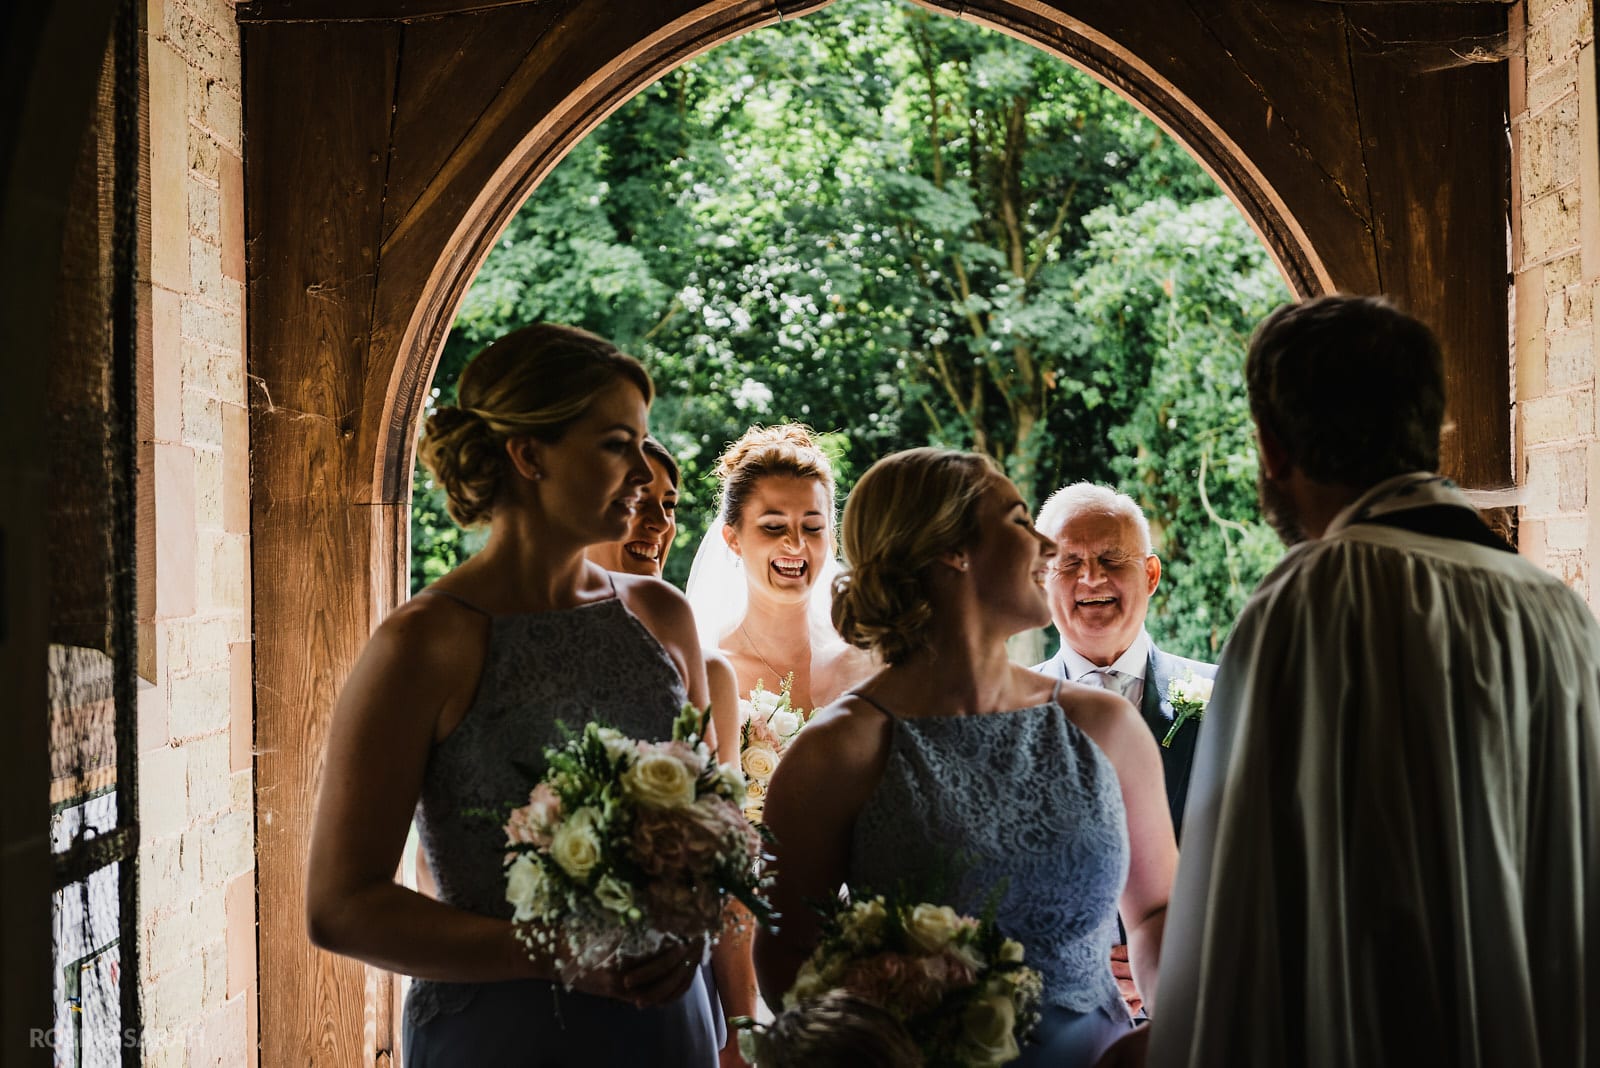 Bride, dad and bridesmaids laughing before they enter church for wedding ceremony